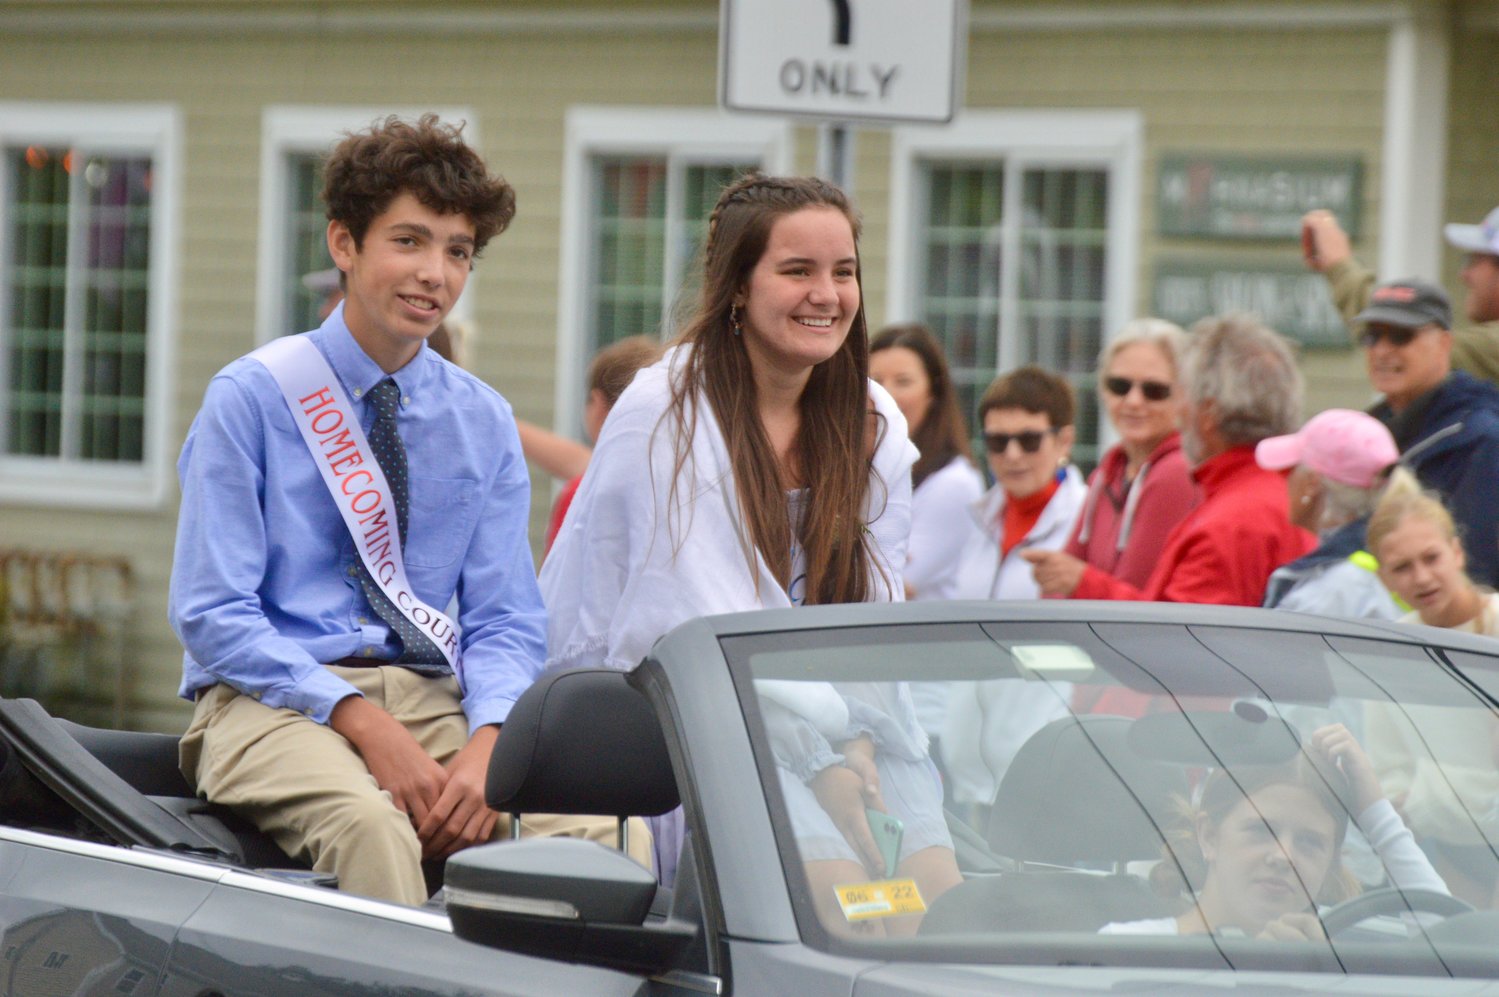 Ronan Caulfield and Ashley Sullivan of the Homecoming court greet spectators during the parade.